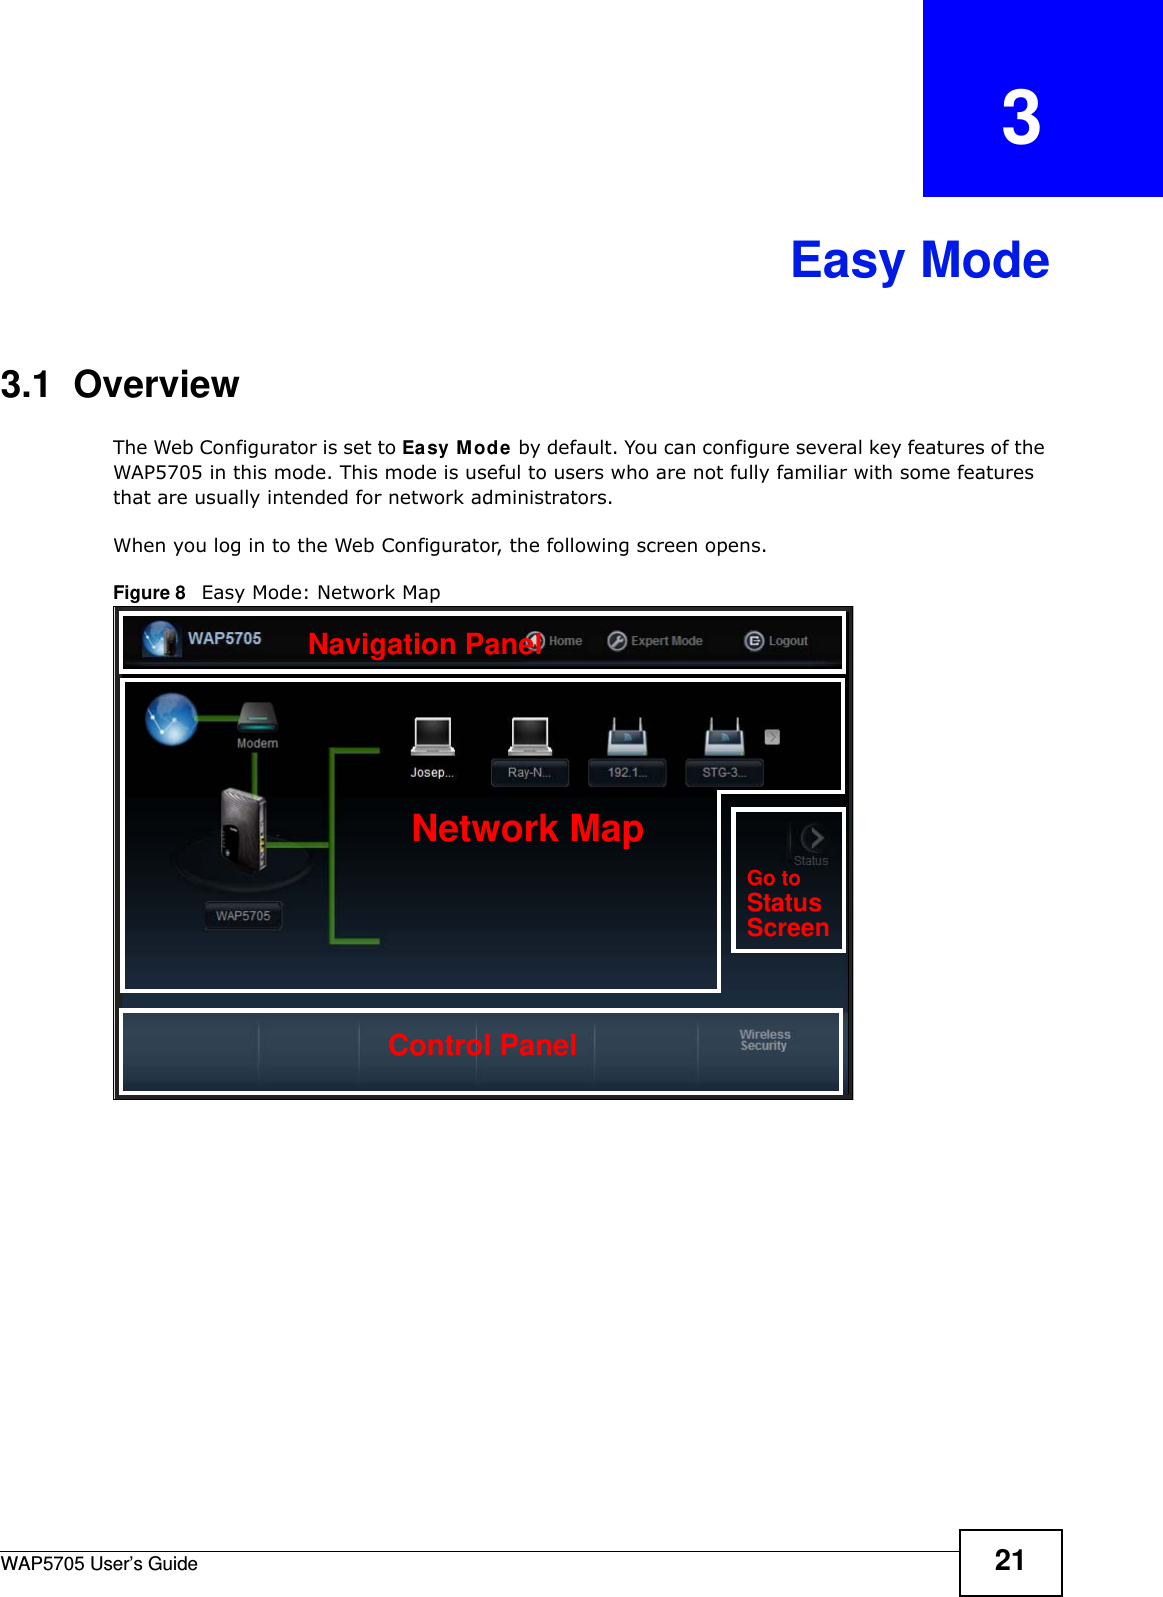 WAP5705 User’s Guide 21CHAPTER   3Easy Mode3.1  OverviewThe Web Configurator is set to Easy M ode  by default. You can configure several key features of the WAP5705 in this mode. This mode is useful to users who are not fully familiar with some features that are usually intended for network administrators.When you log in to the Web Configurator, the following screen opens.Figure 8   Easy Mode: Network Map Network MapControl PanelGo toStatusScreenNavigation Panel